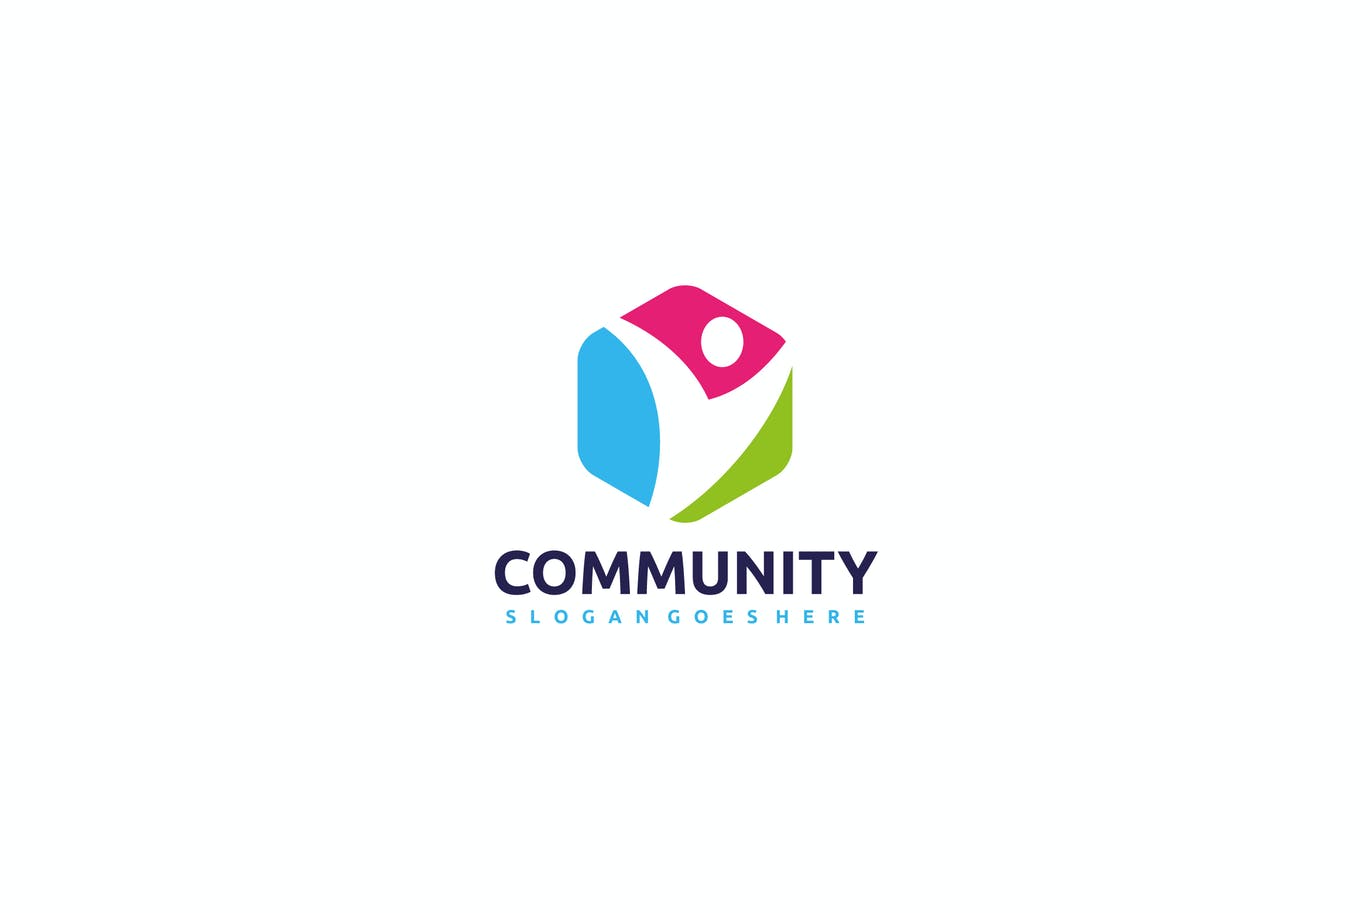 A colorful society logo template